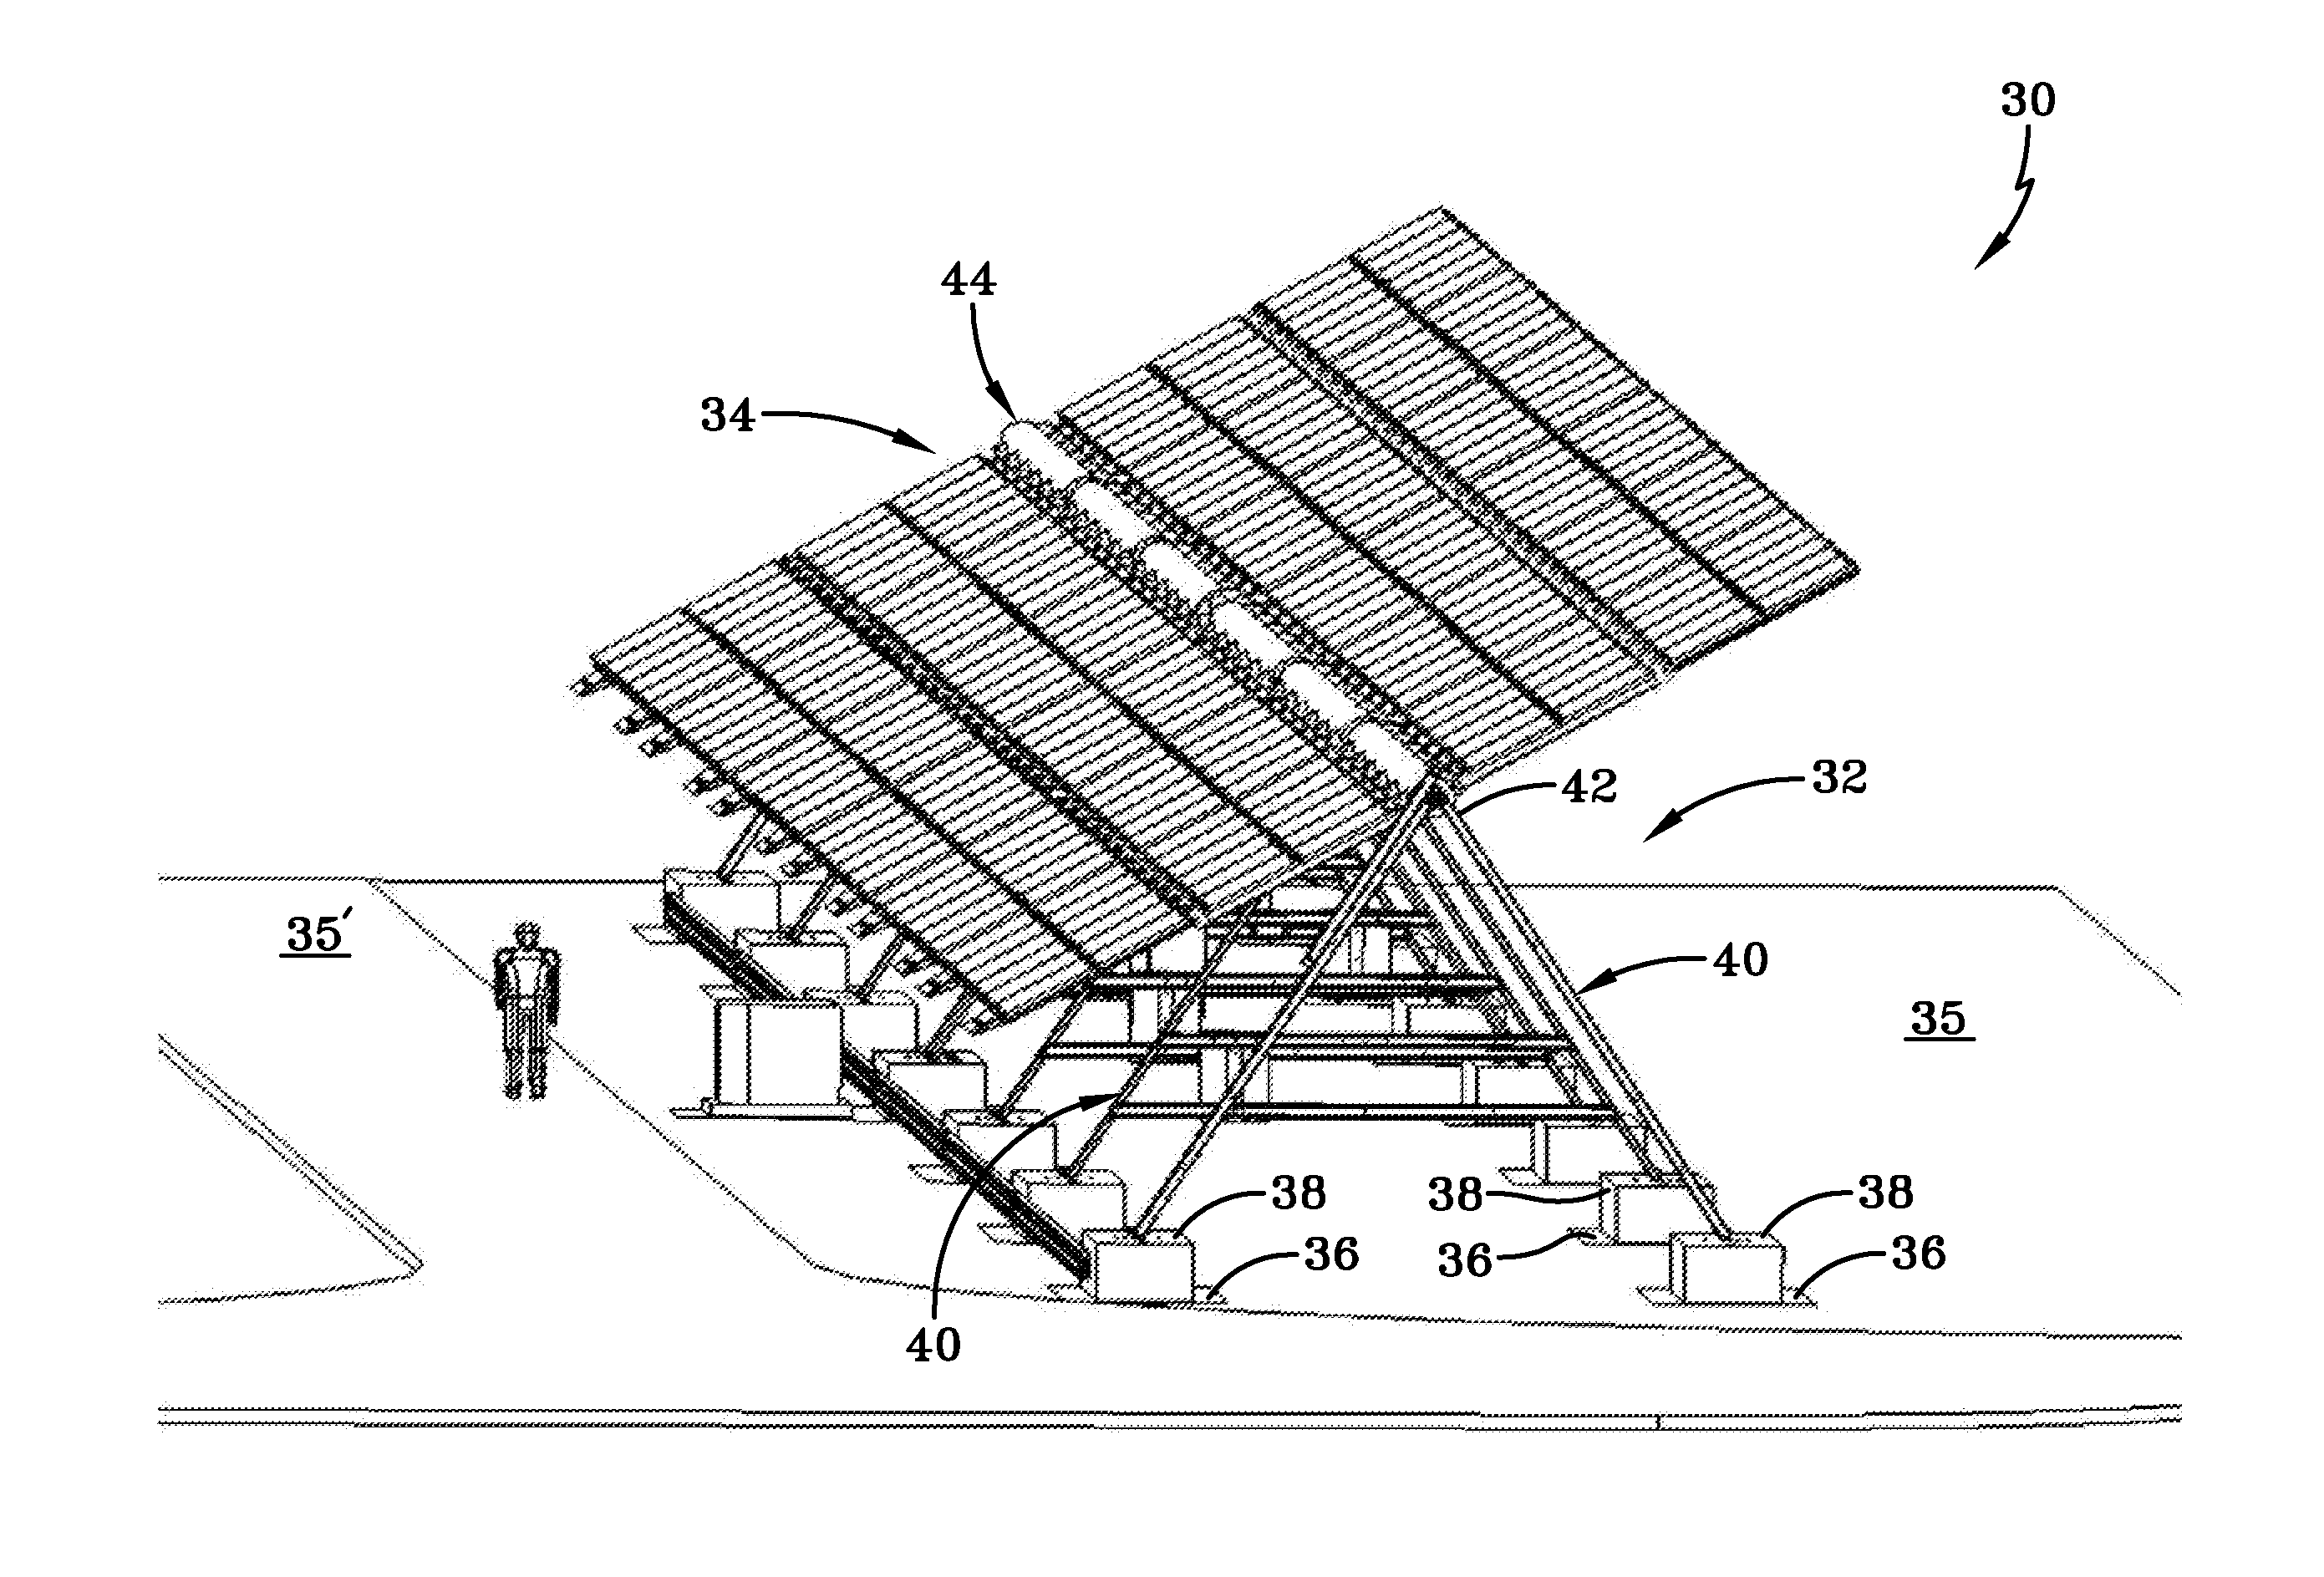 Foldable solar tracking system, assembly and method for assembly, shipping and installation of the same